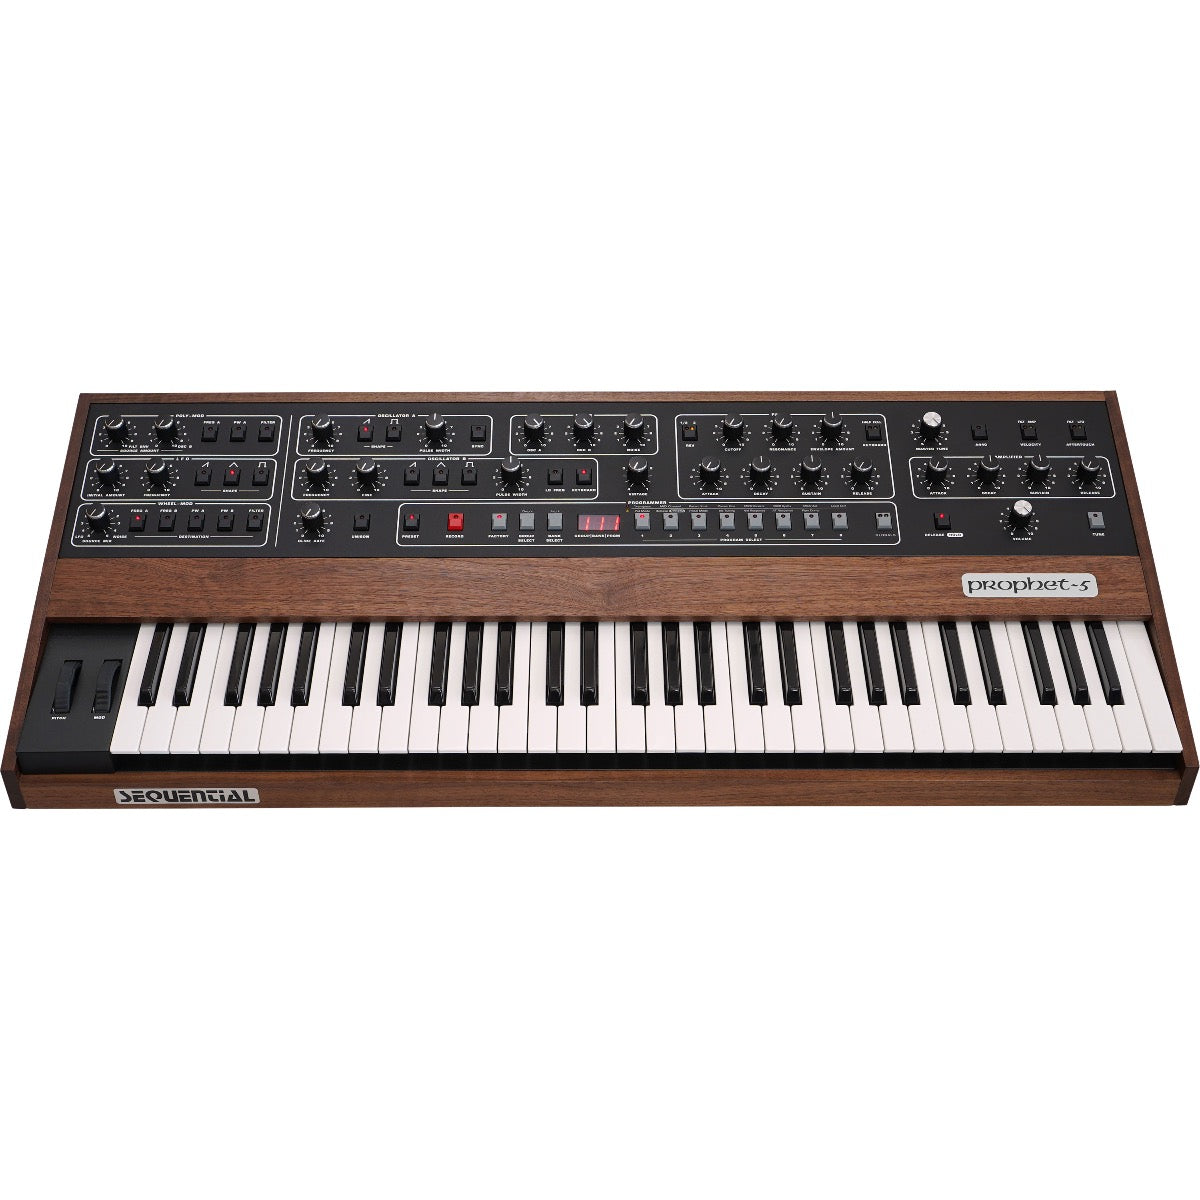 Perspective view of Sequential Prophet-5 Polyphonic Analog Keyboard Synthesizer showing top and front